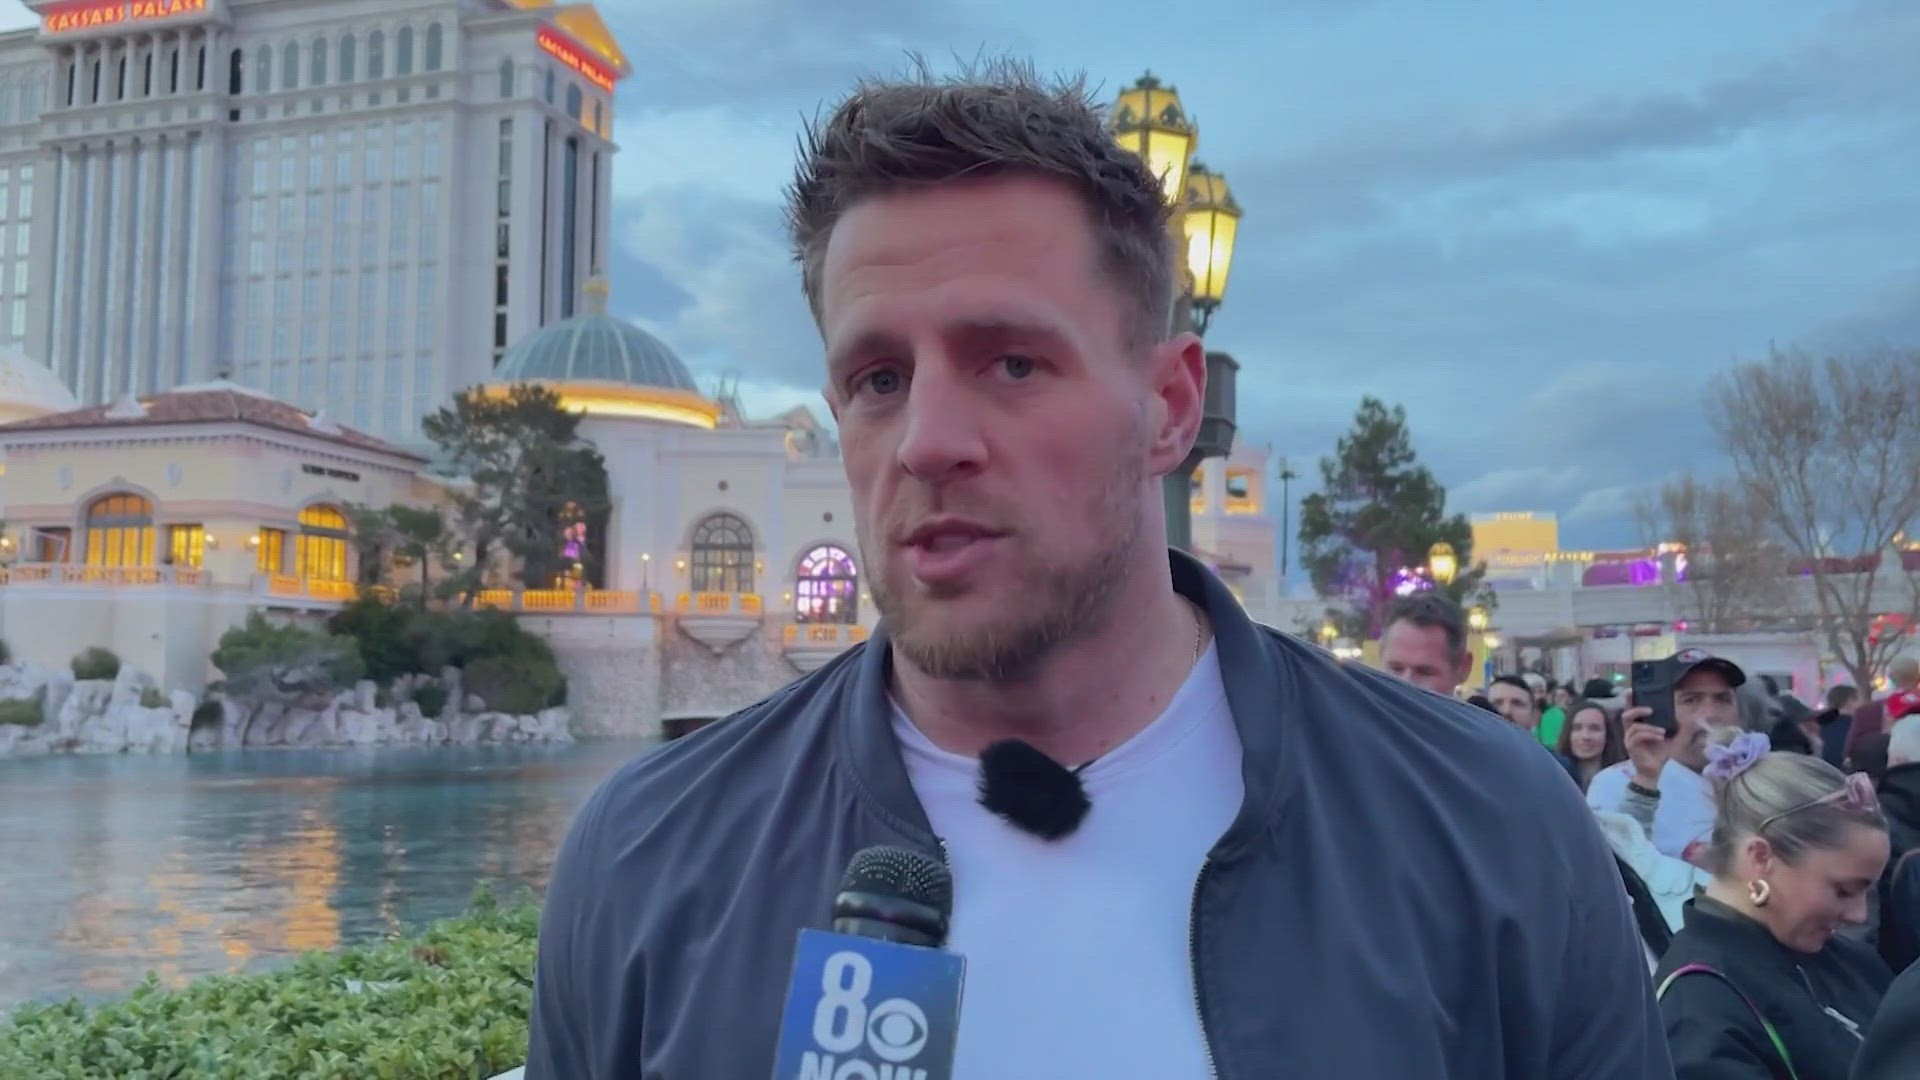 JJ Watt is in Vegas as part of the CBS Sports coverage of the big game.